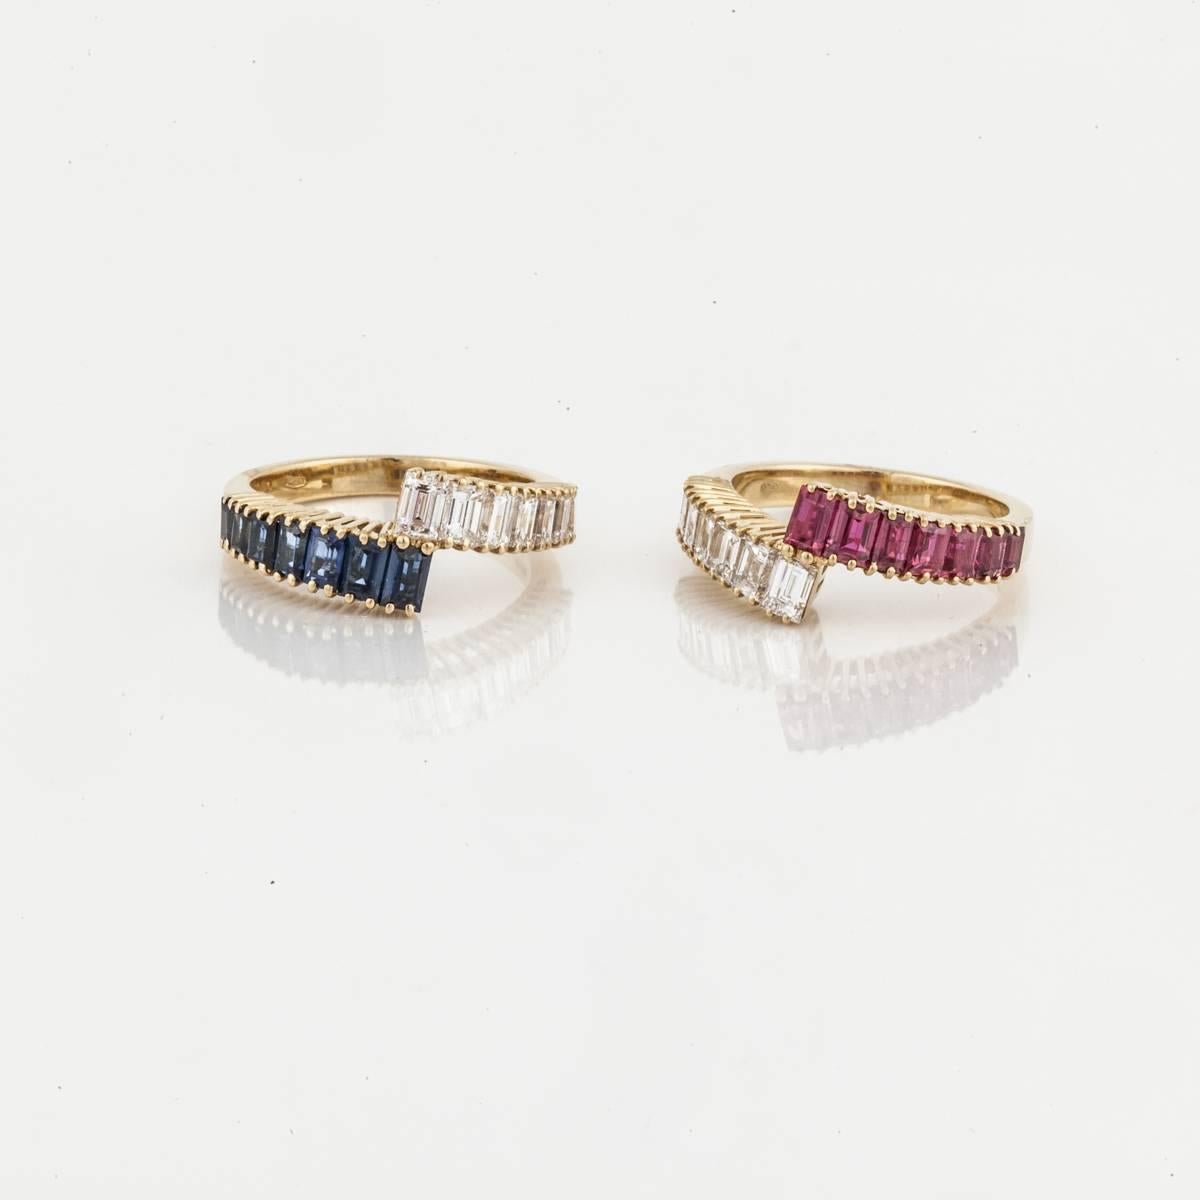 Baguette Cut Diamond/Ruby and Diamond/Sapphire Nesting Crossover Rings in 18K Gold